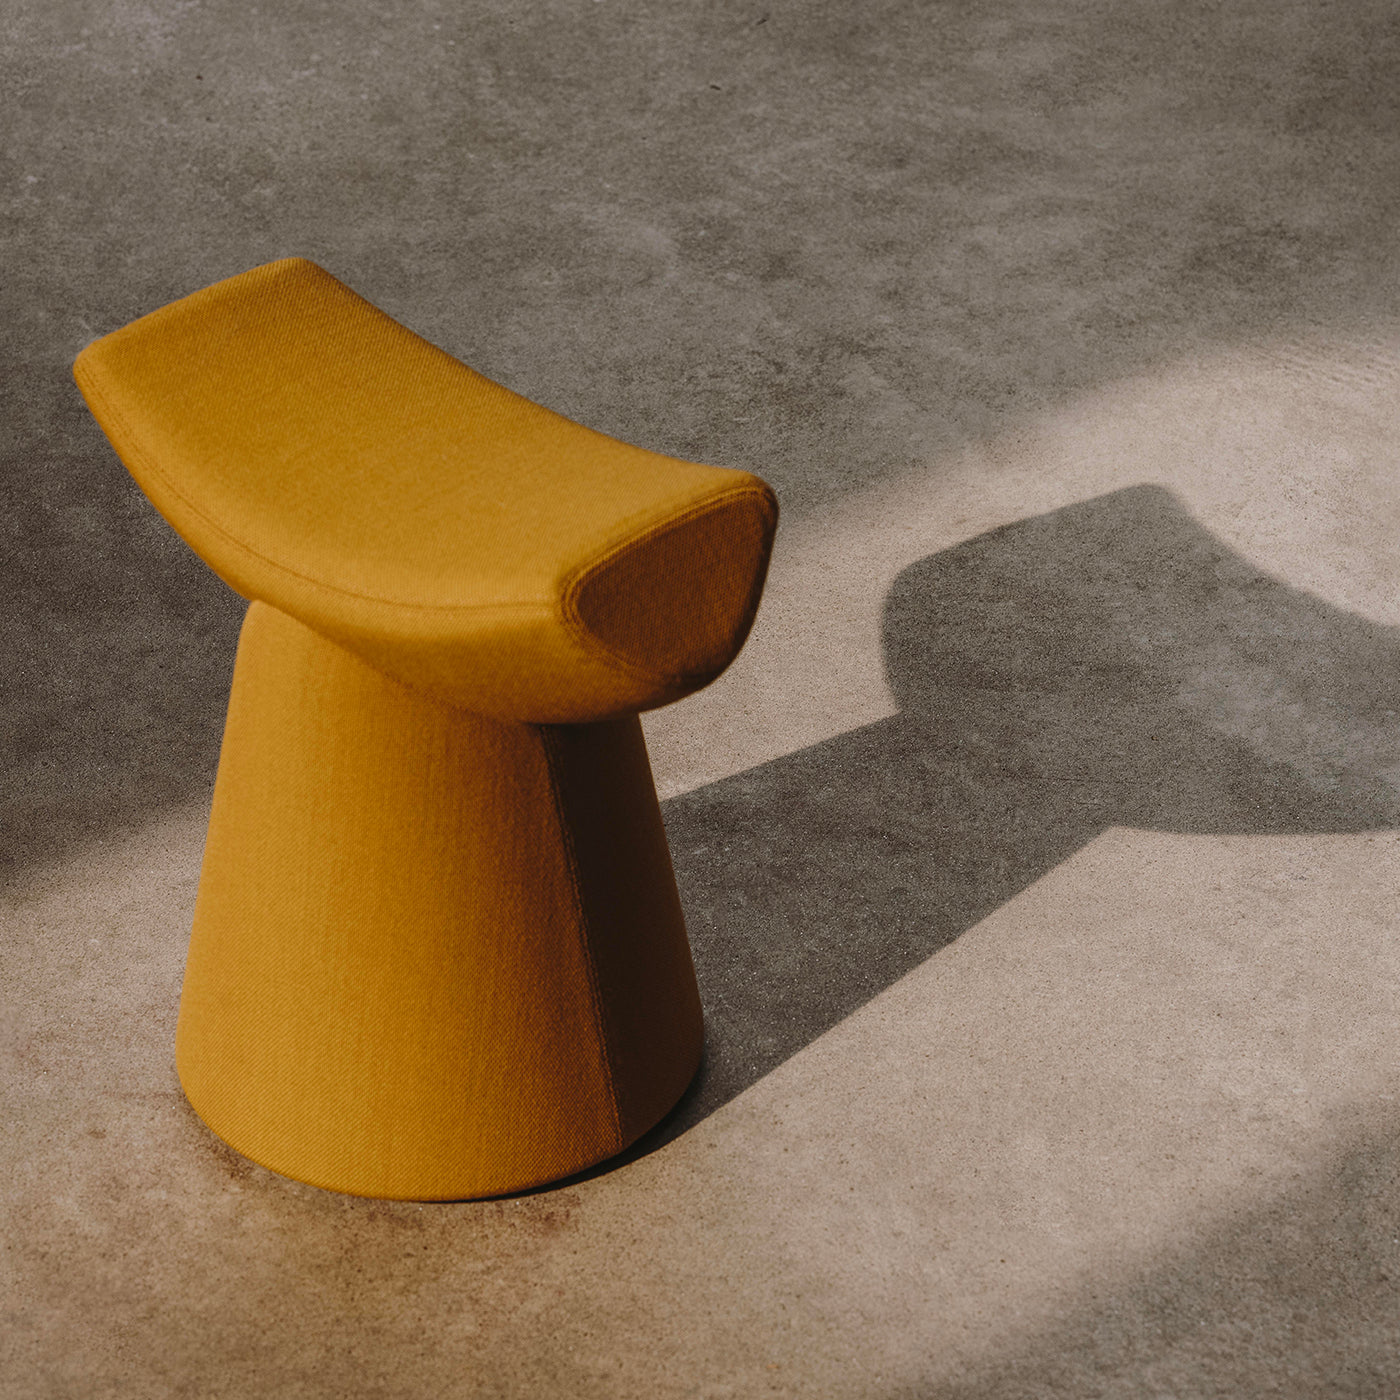 Guardian Stool with Handle by Patrick Norguet - Alternative view 5